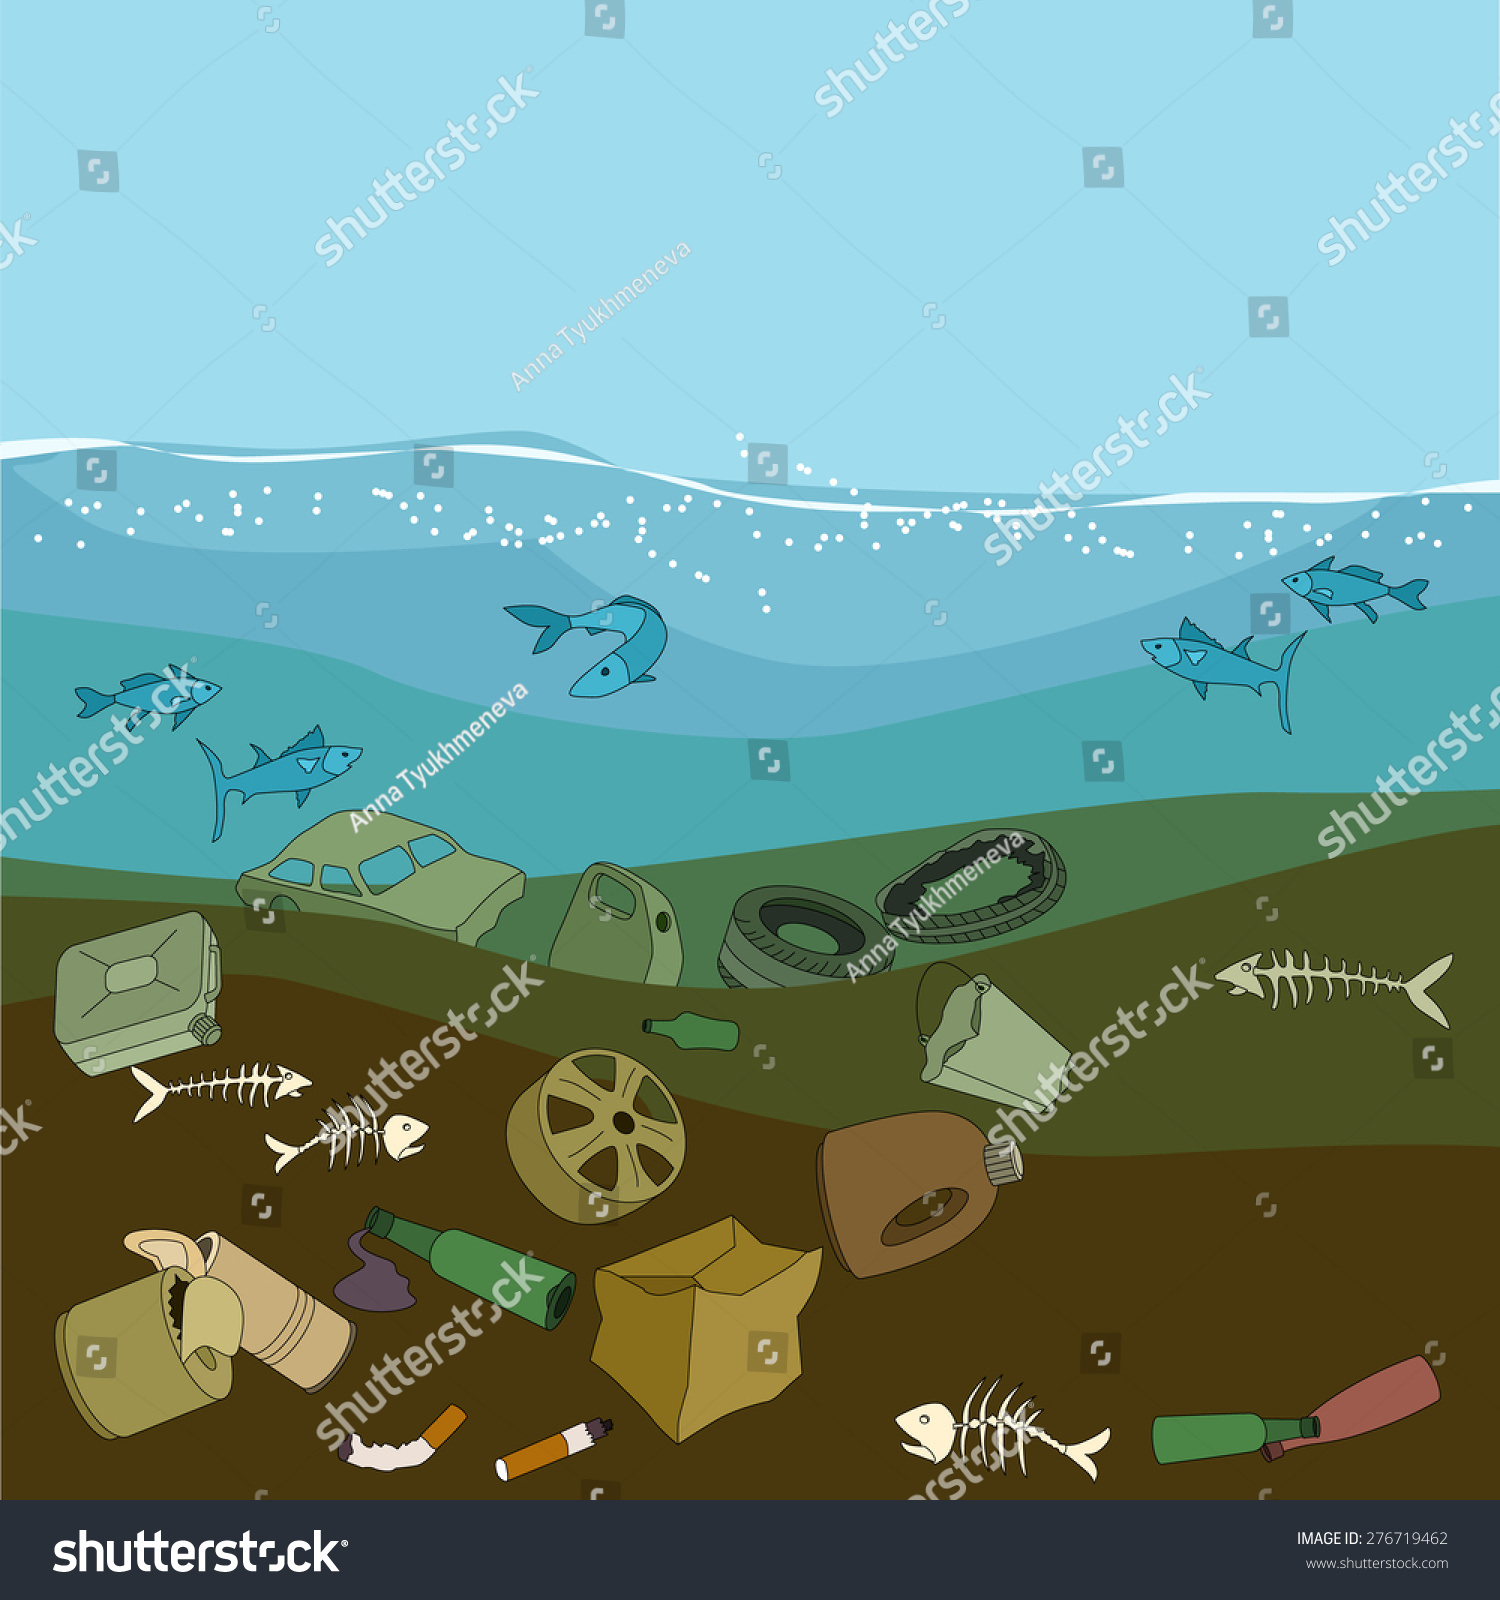 Water Pollution In The Ocean. Garbage, Waste. Eco Concept. Stock Vector ...